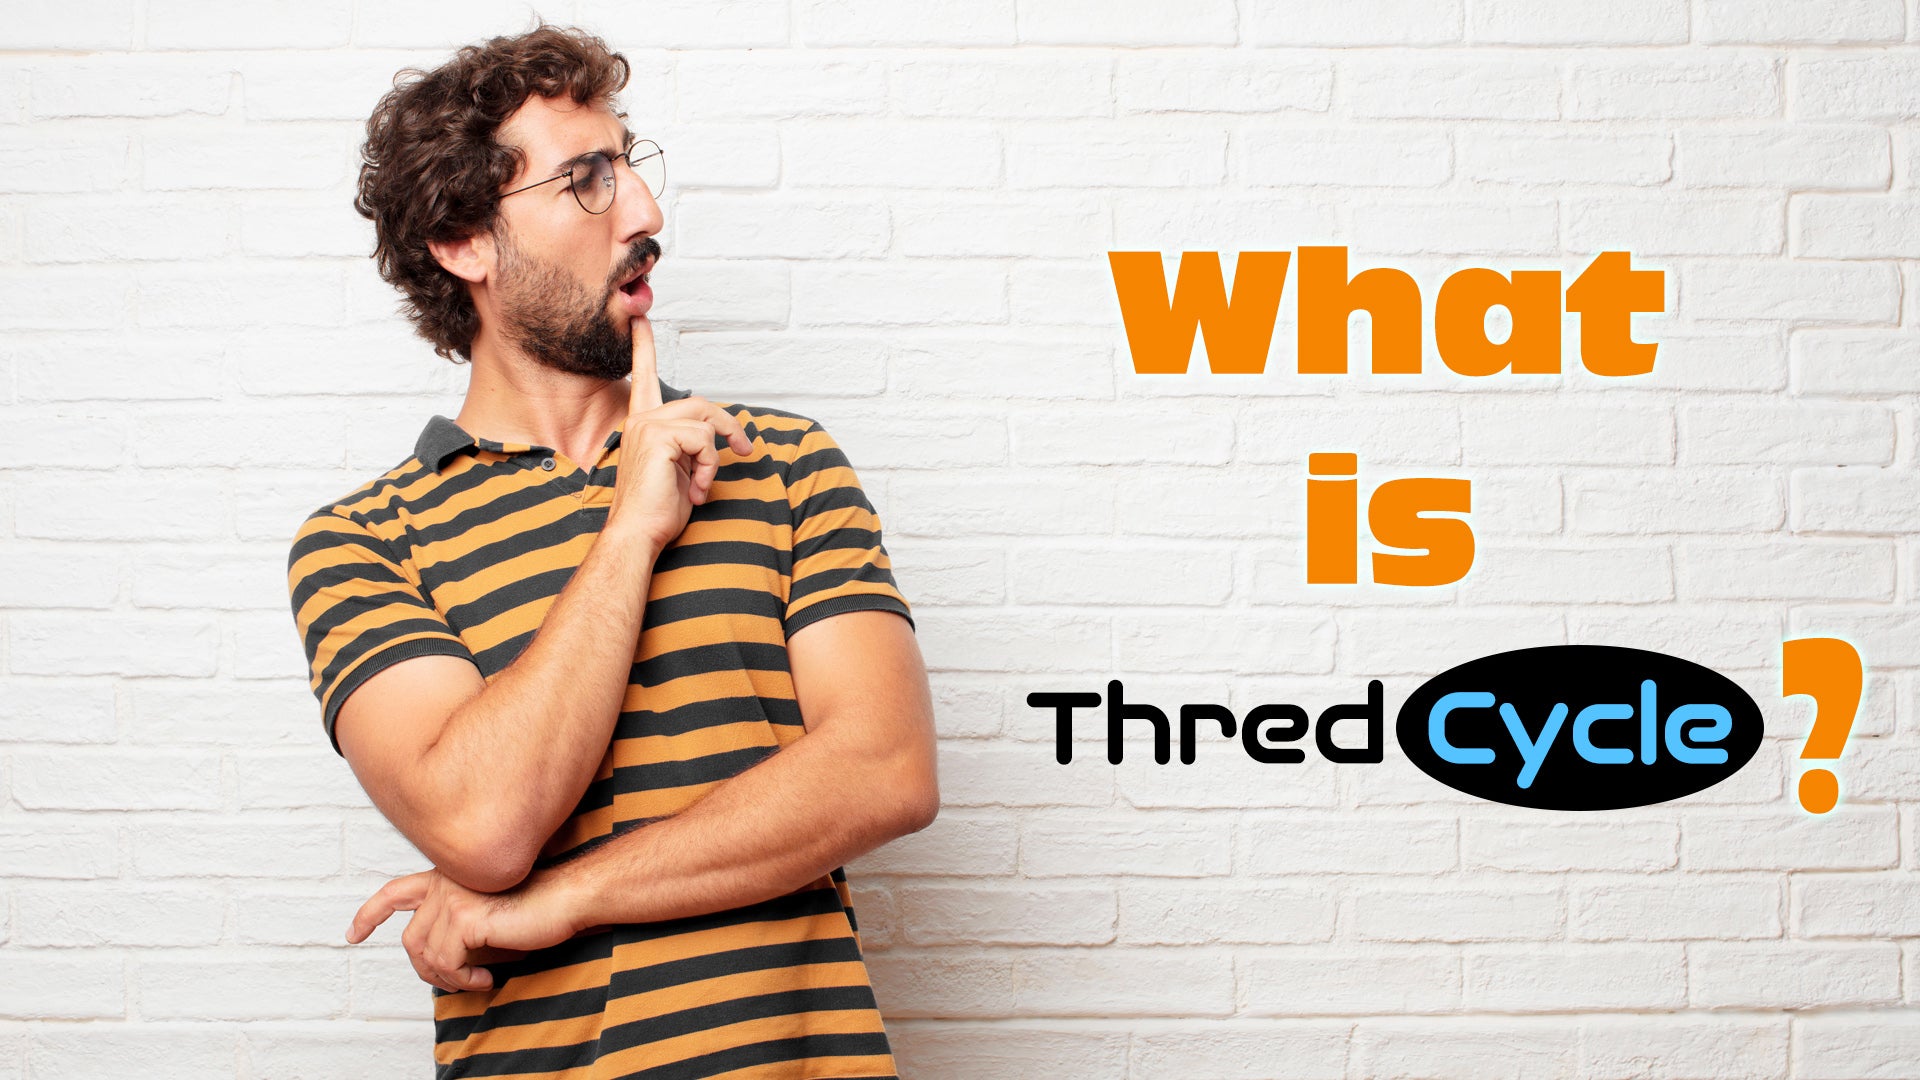 Load video: Do you have valuable clothes you wish could easily turn into cash?   Selling online, and to thrift stores can be exhausting and can often lead to receiving nothing in exchange for those high-quality clothes.     Now there’s a better way! Introducing ThredCycle, the hassle-free way to get paid for quality clothing items!  Sign-up, drop your clothes into one of our bins and get paid within 48 hours.  It’s that simple.  Join ThredCycle today and turn your preloved wardrobe into cash, easily and sustainably.